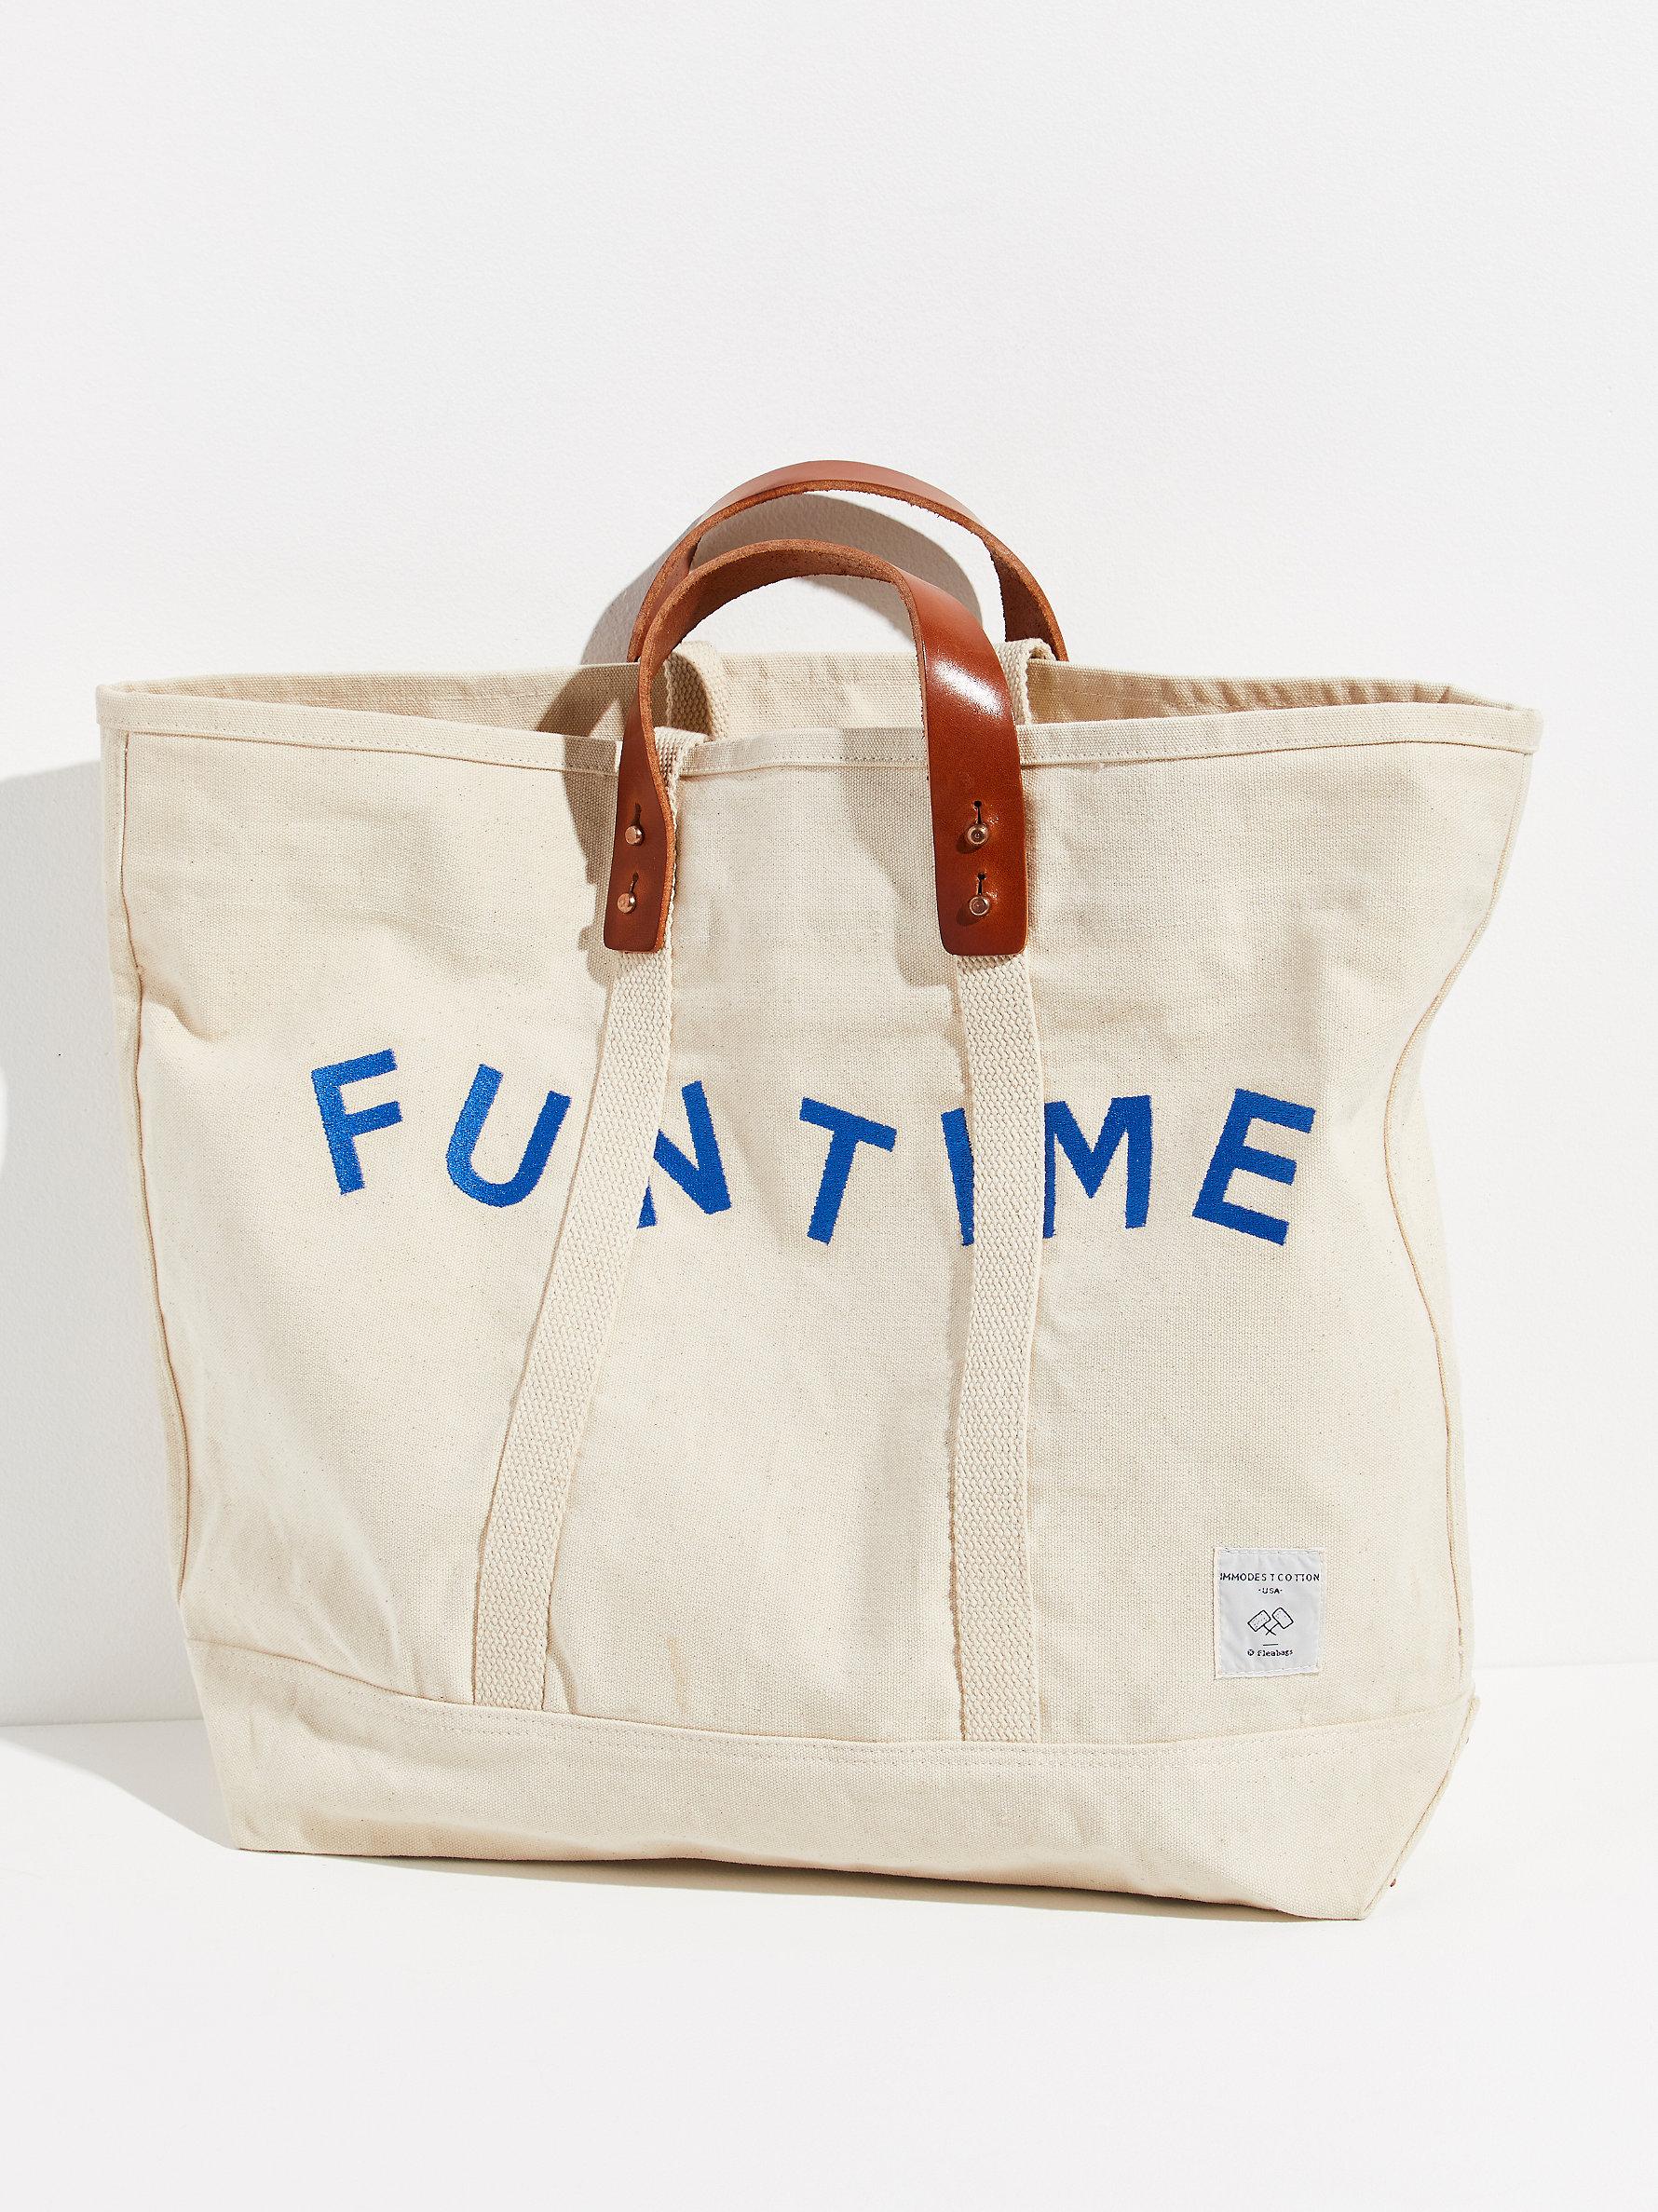 Free People Cotton Fleabag Fun Time East-west Tote in Natural | Lyst